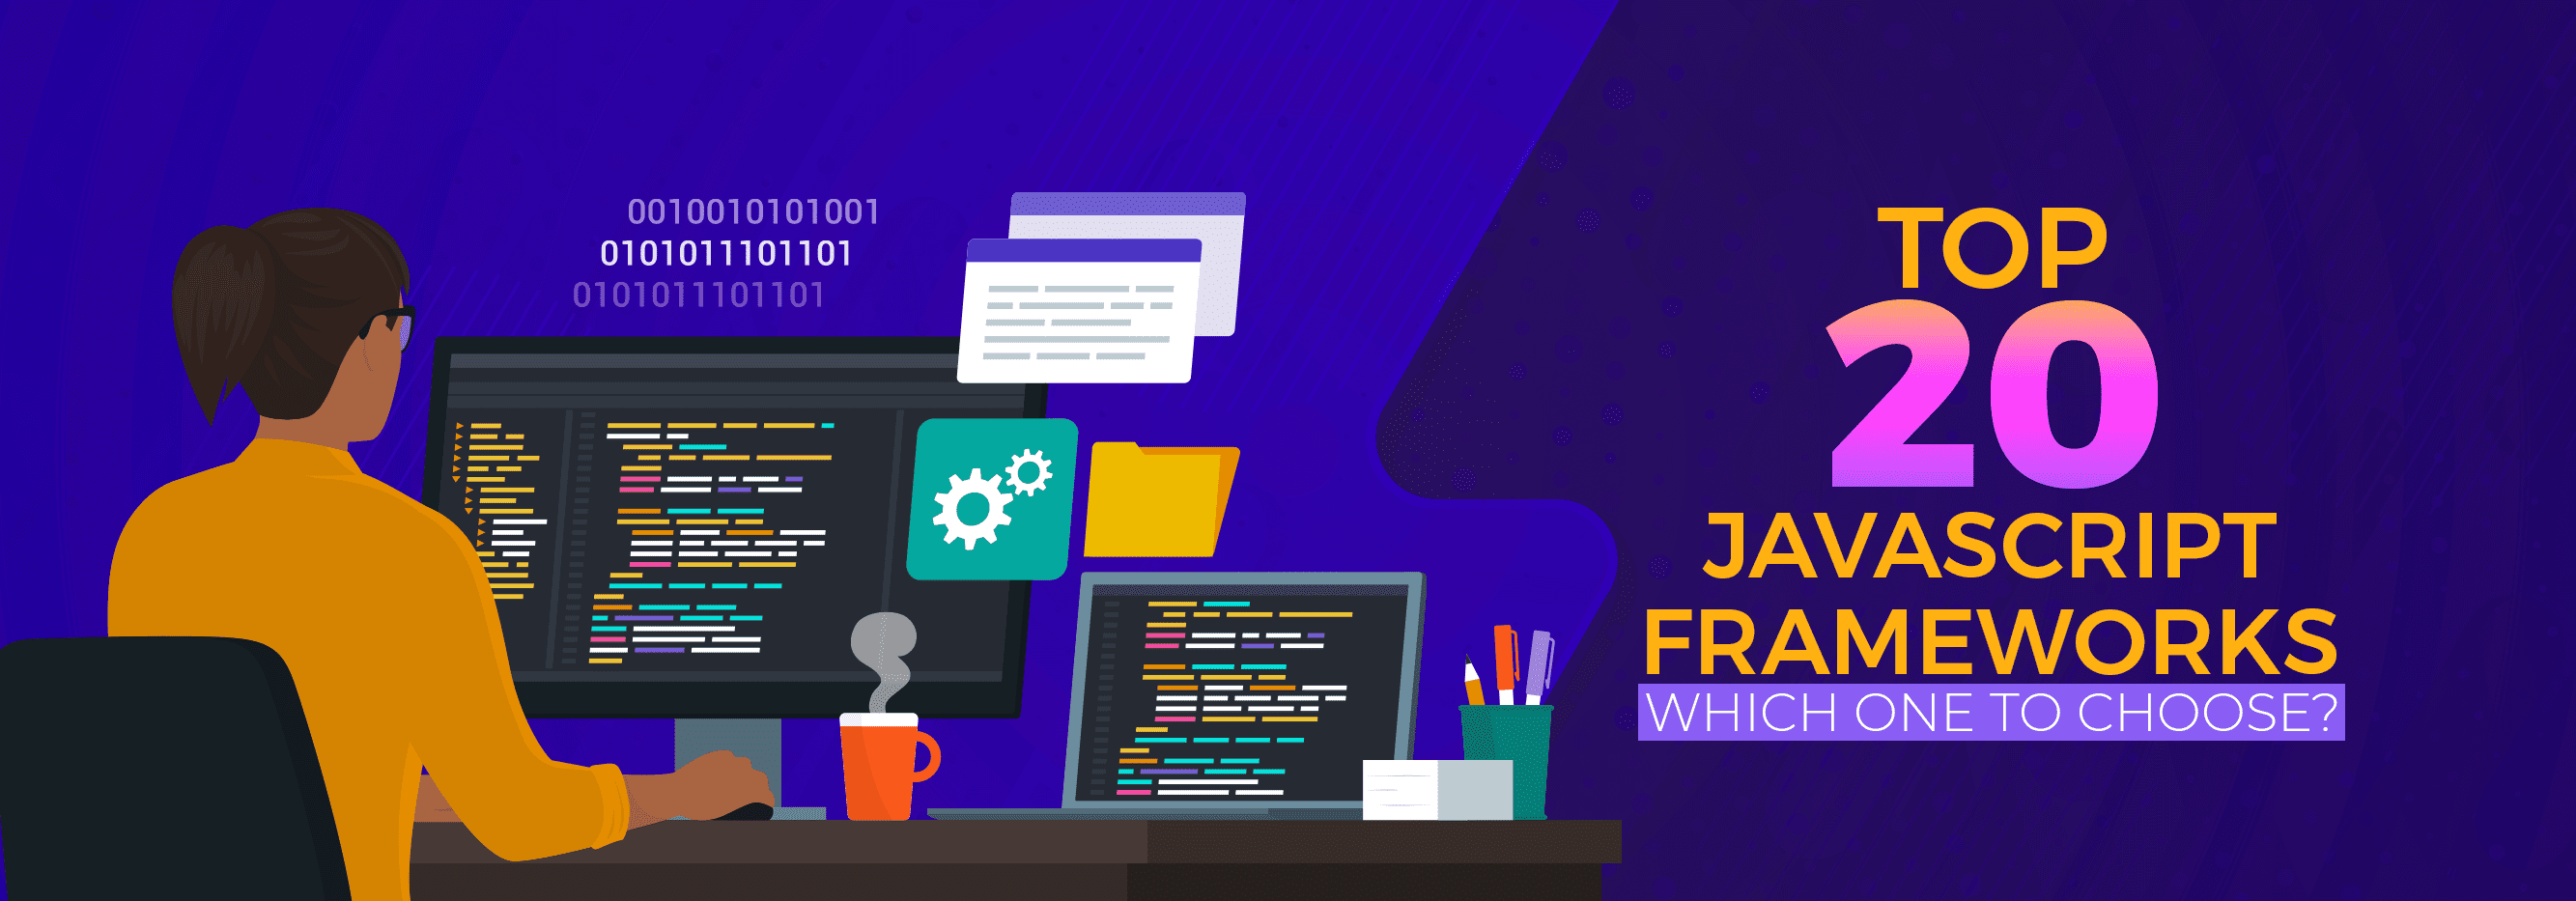 Top 20 JavaScript Frameworks Which One To Choose_banner